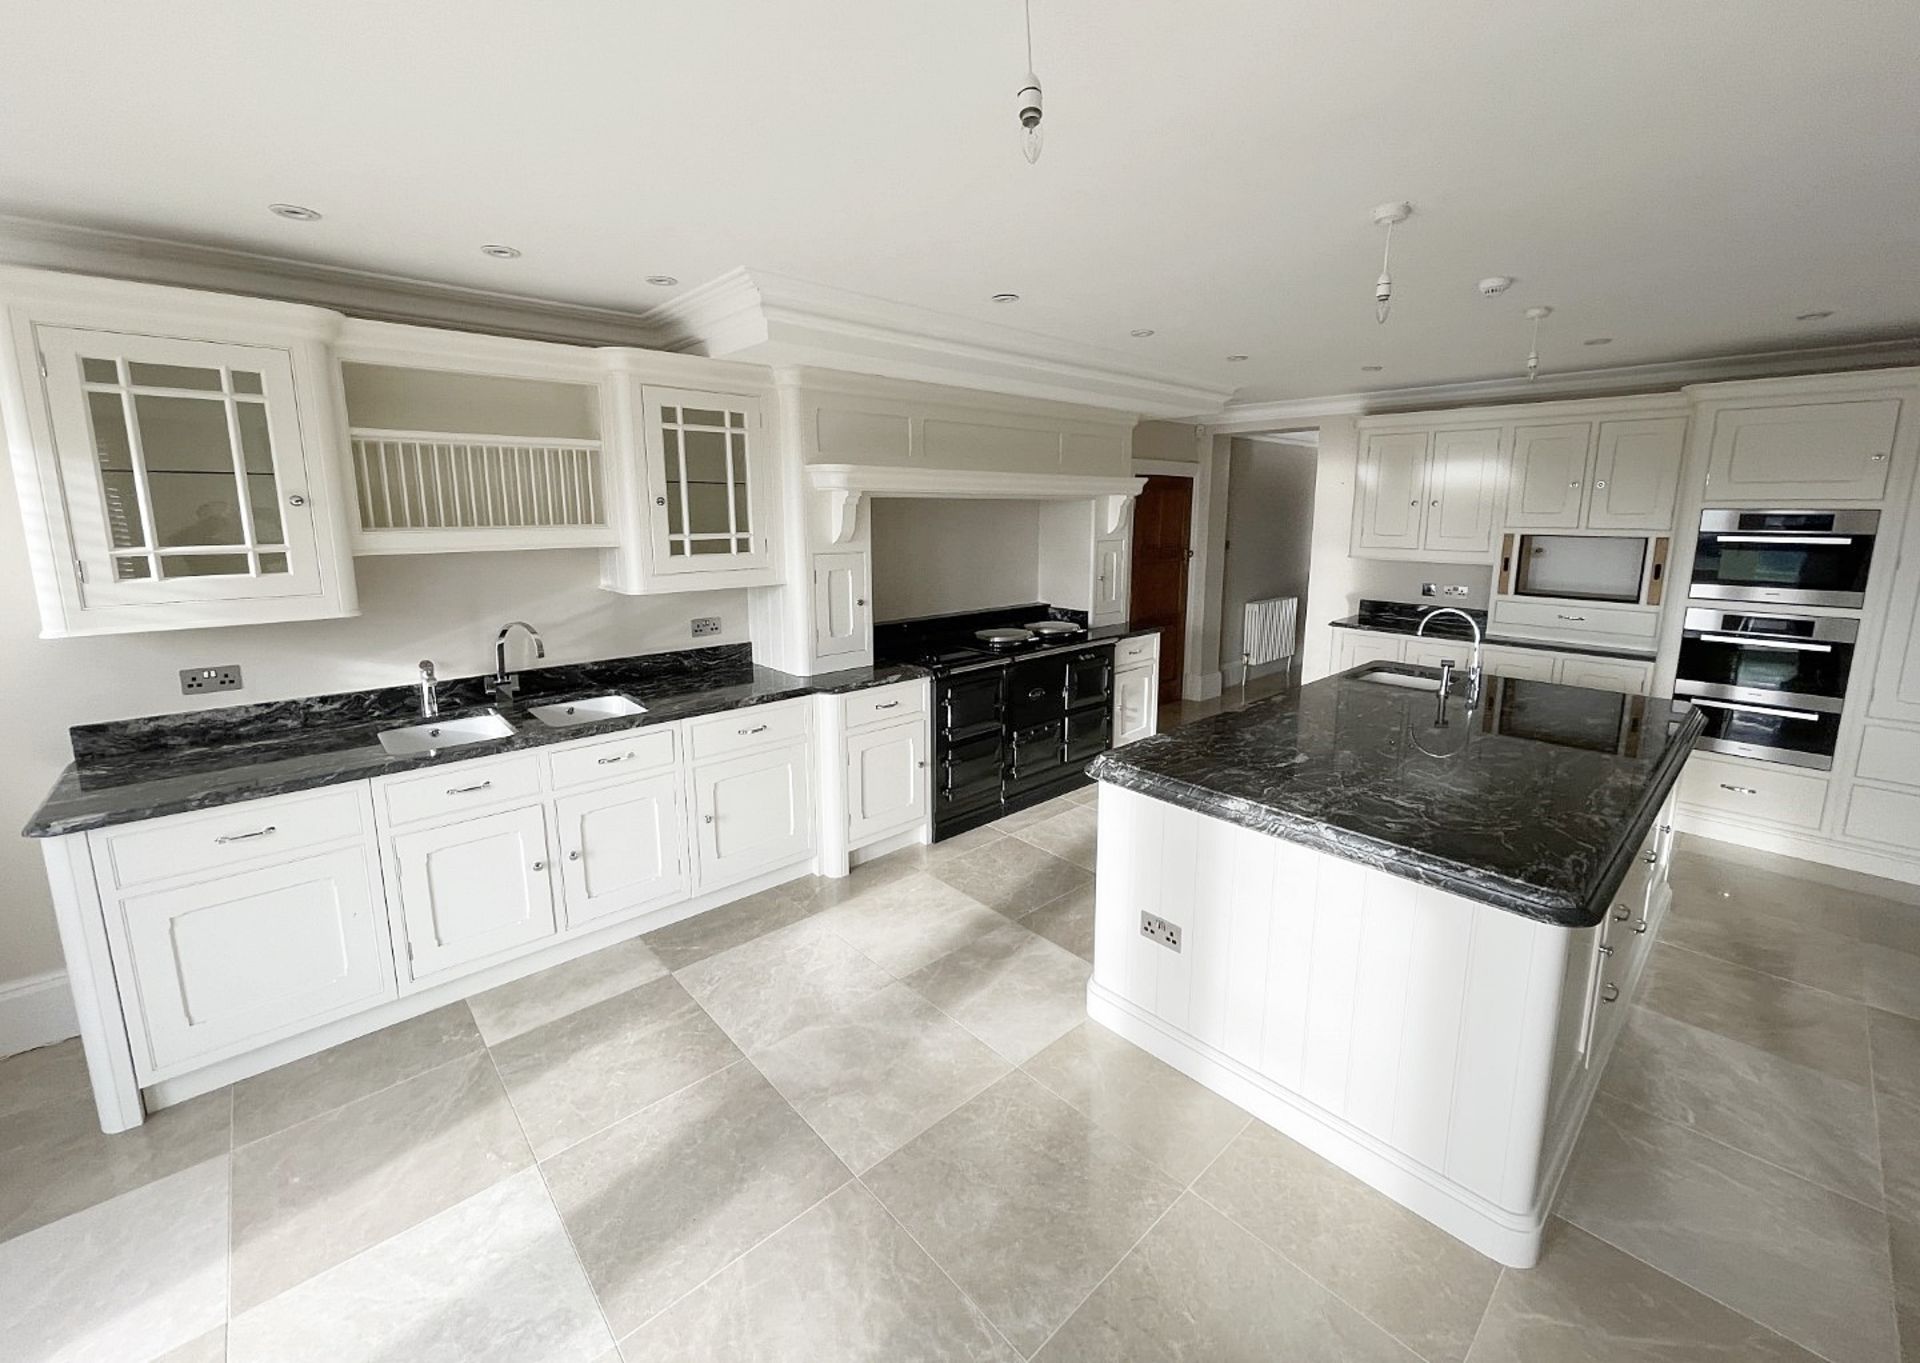 1 x Bespoke Handcrafted Shaker-style Fitted Kitchen Marble Surfaces, Island & Miele Appliances